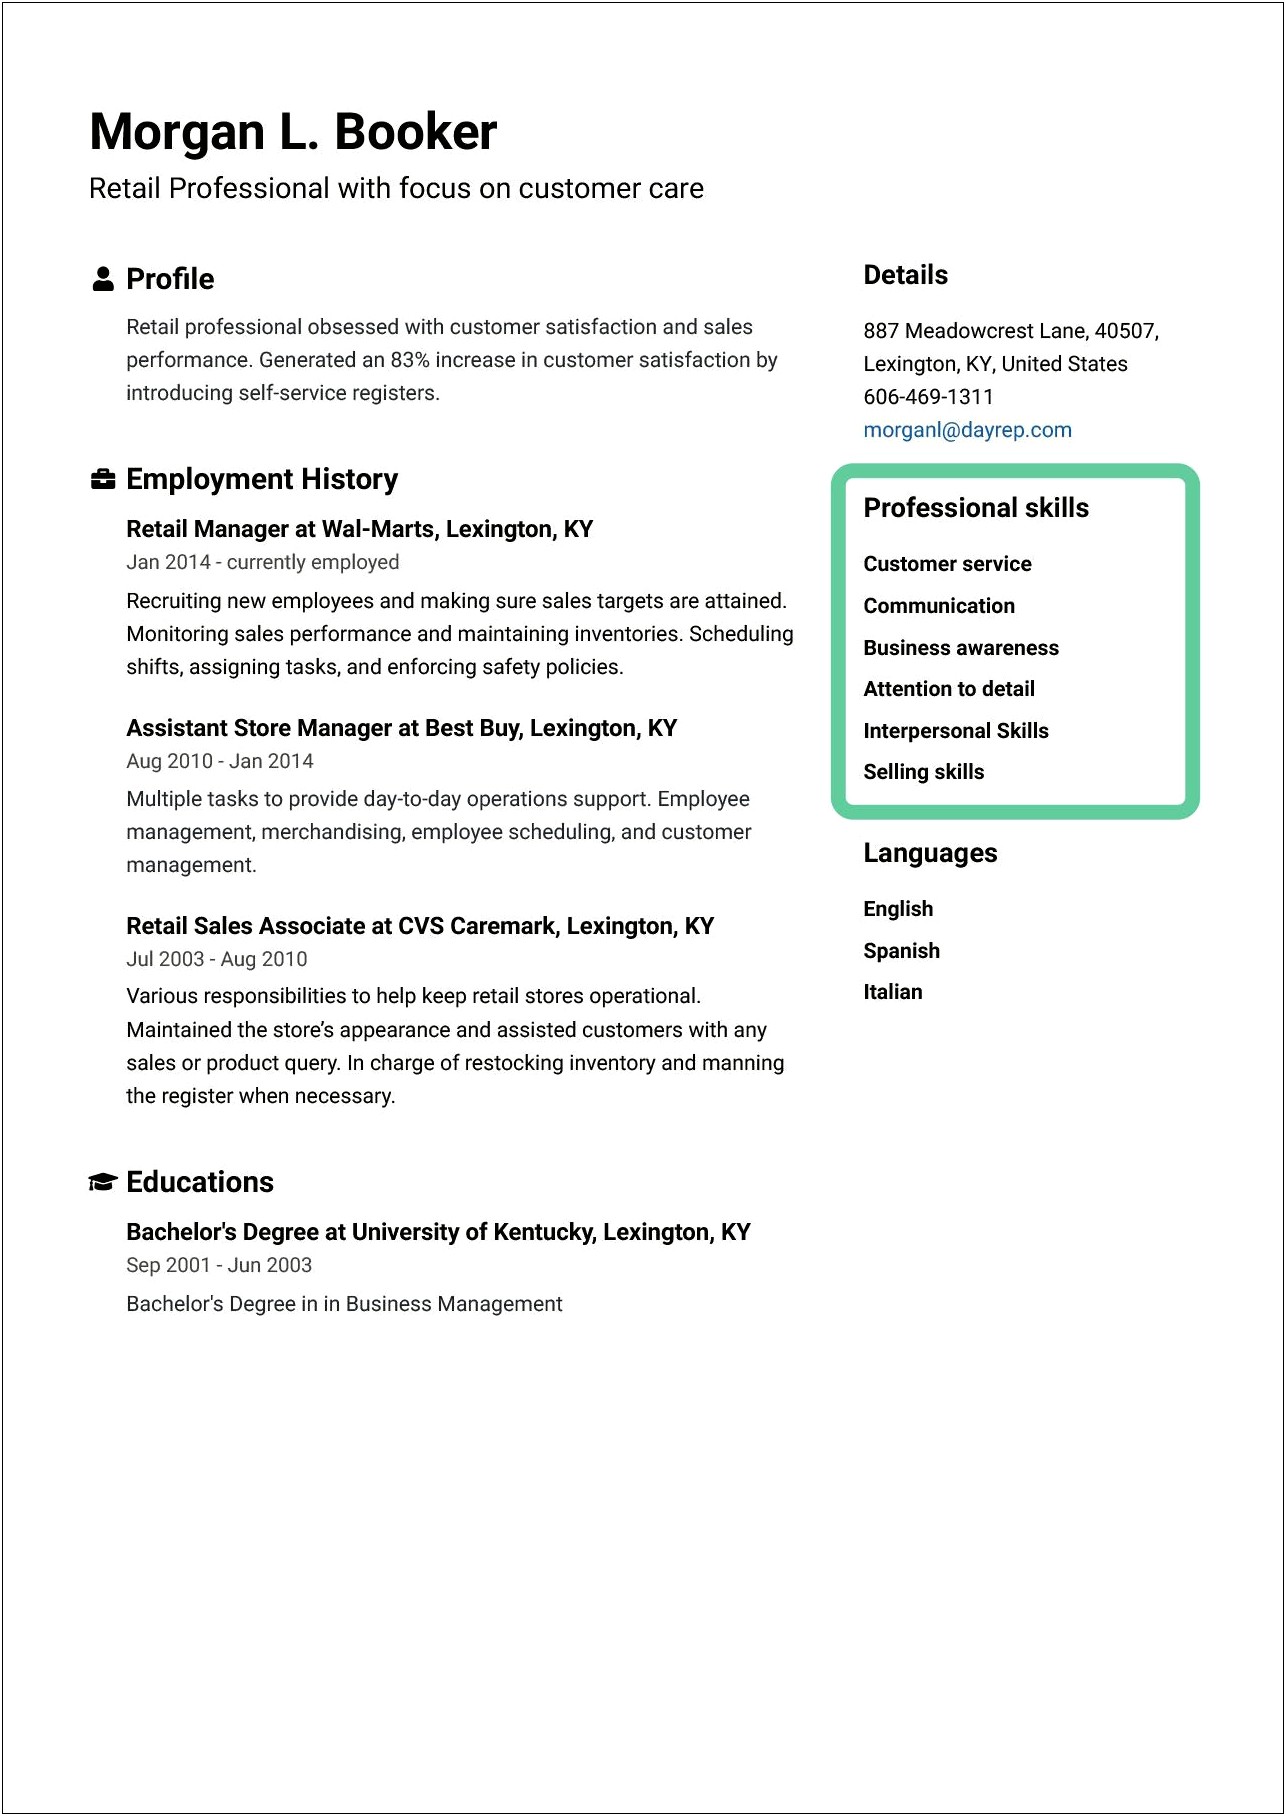 Resume Skills Attention To Detail